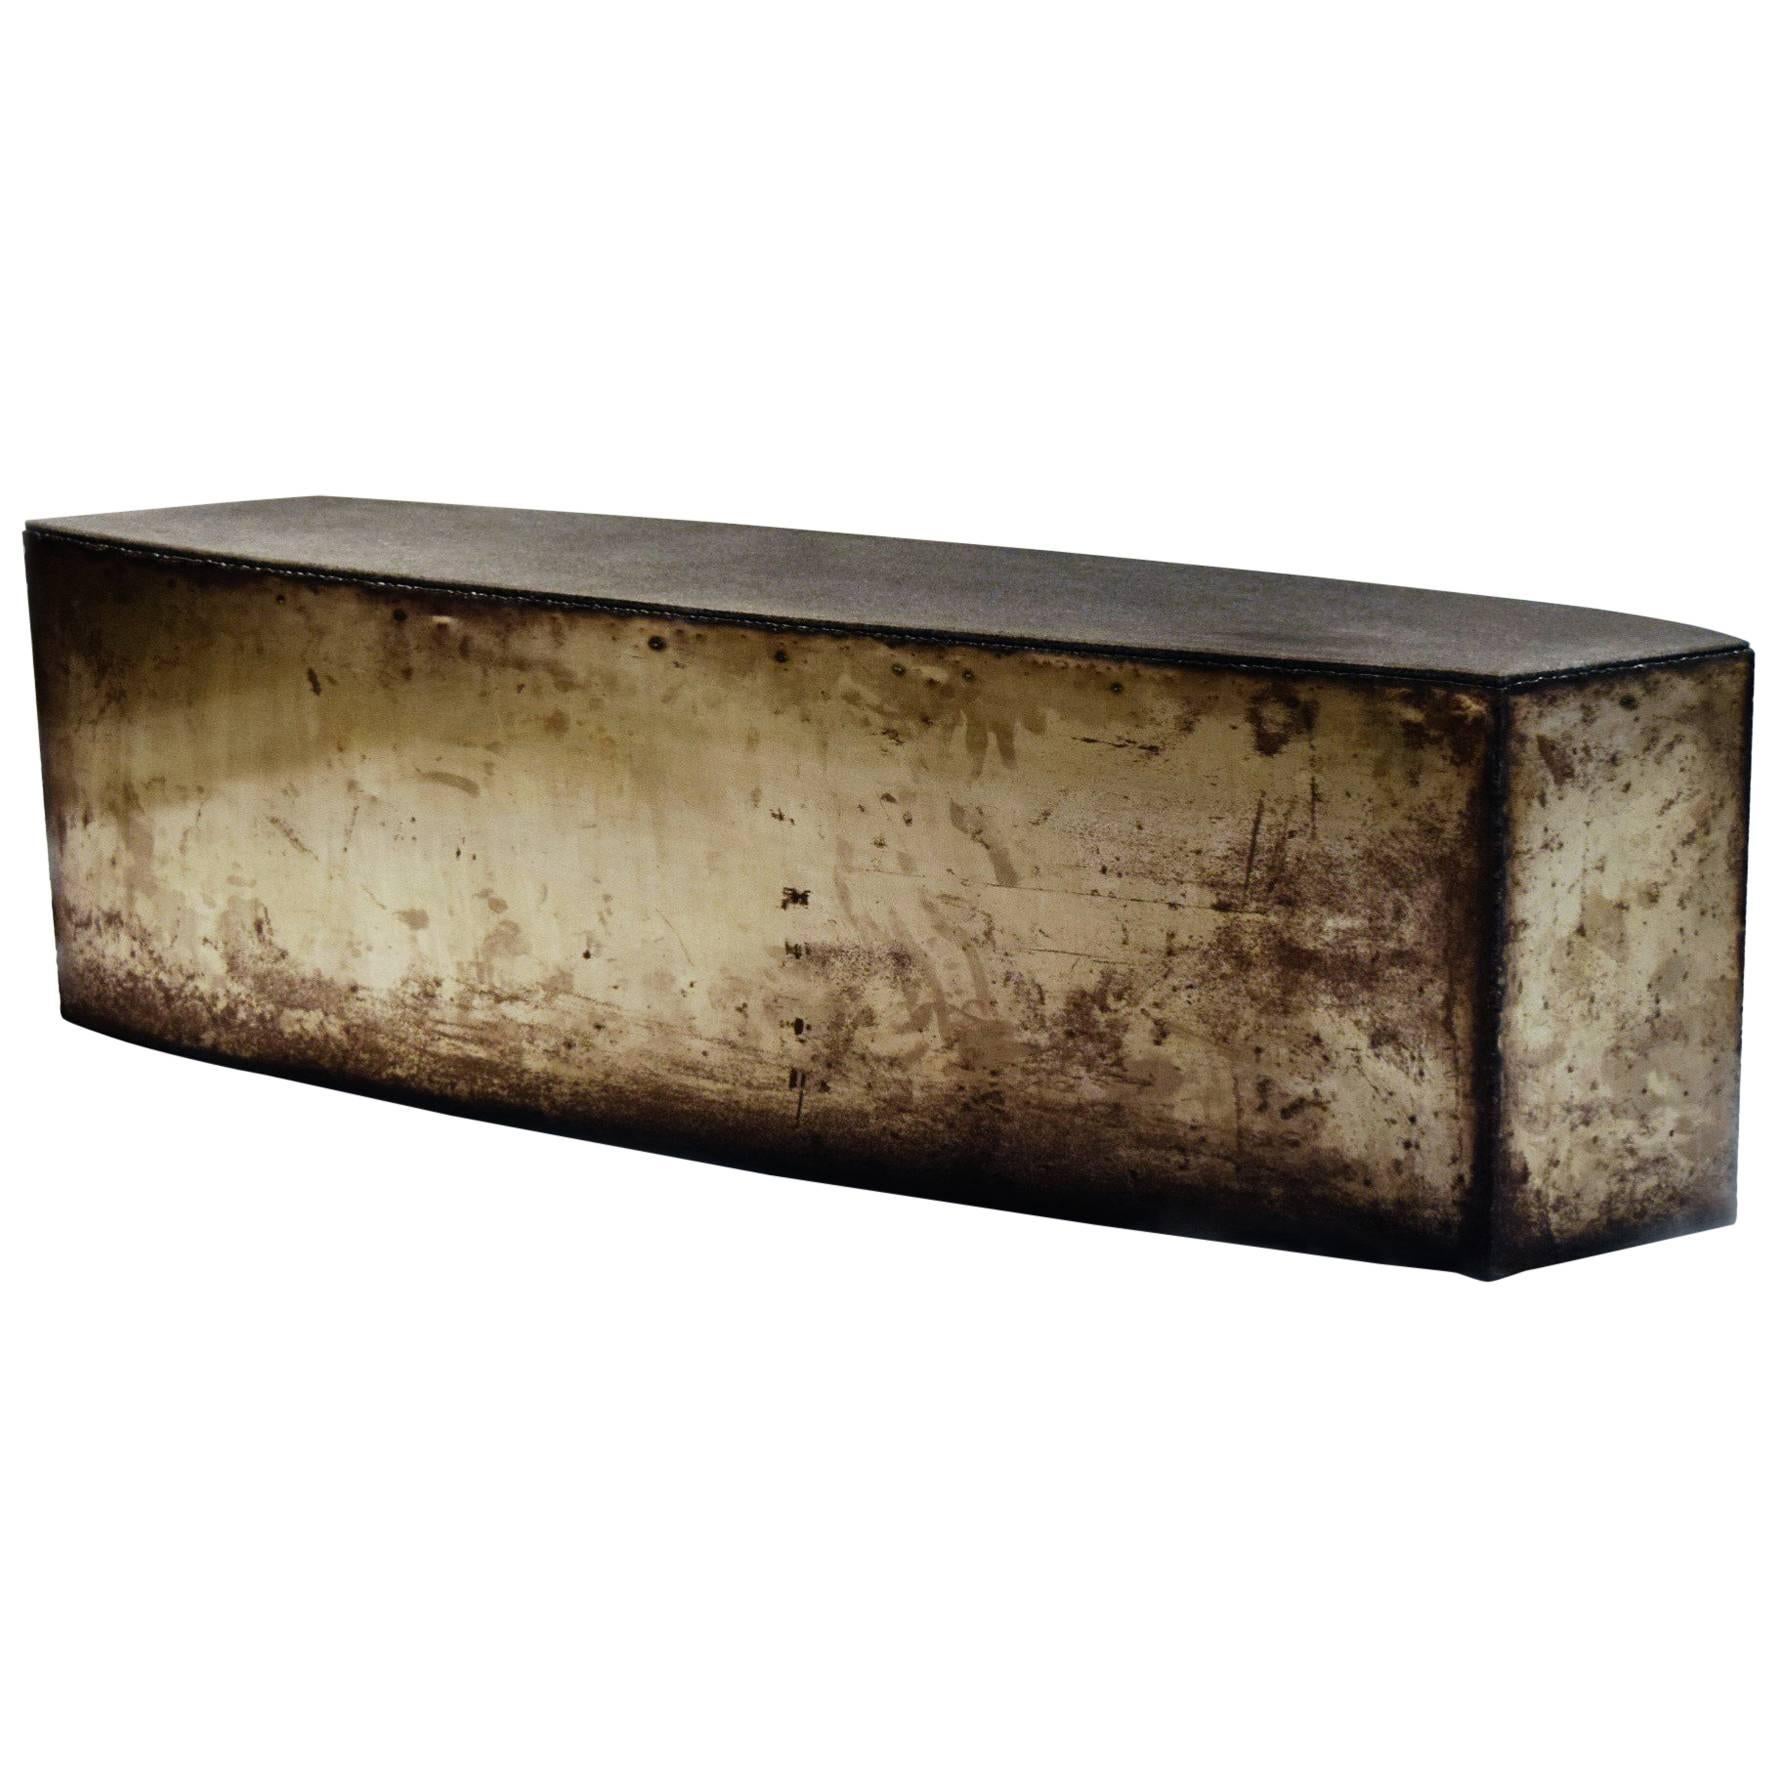 Angular Coffee Table or Bench in Oxidized Steel and Granite, circa 1987